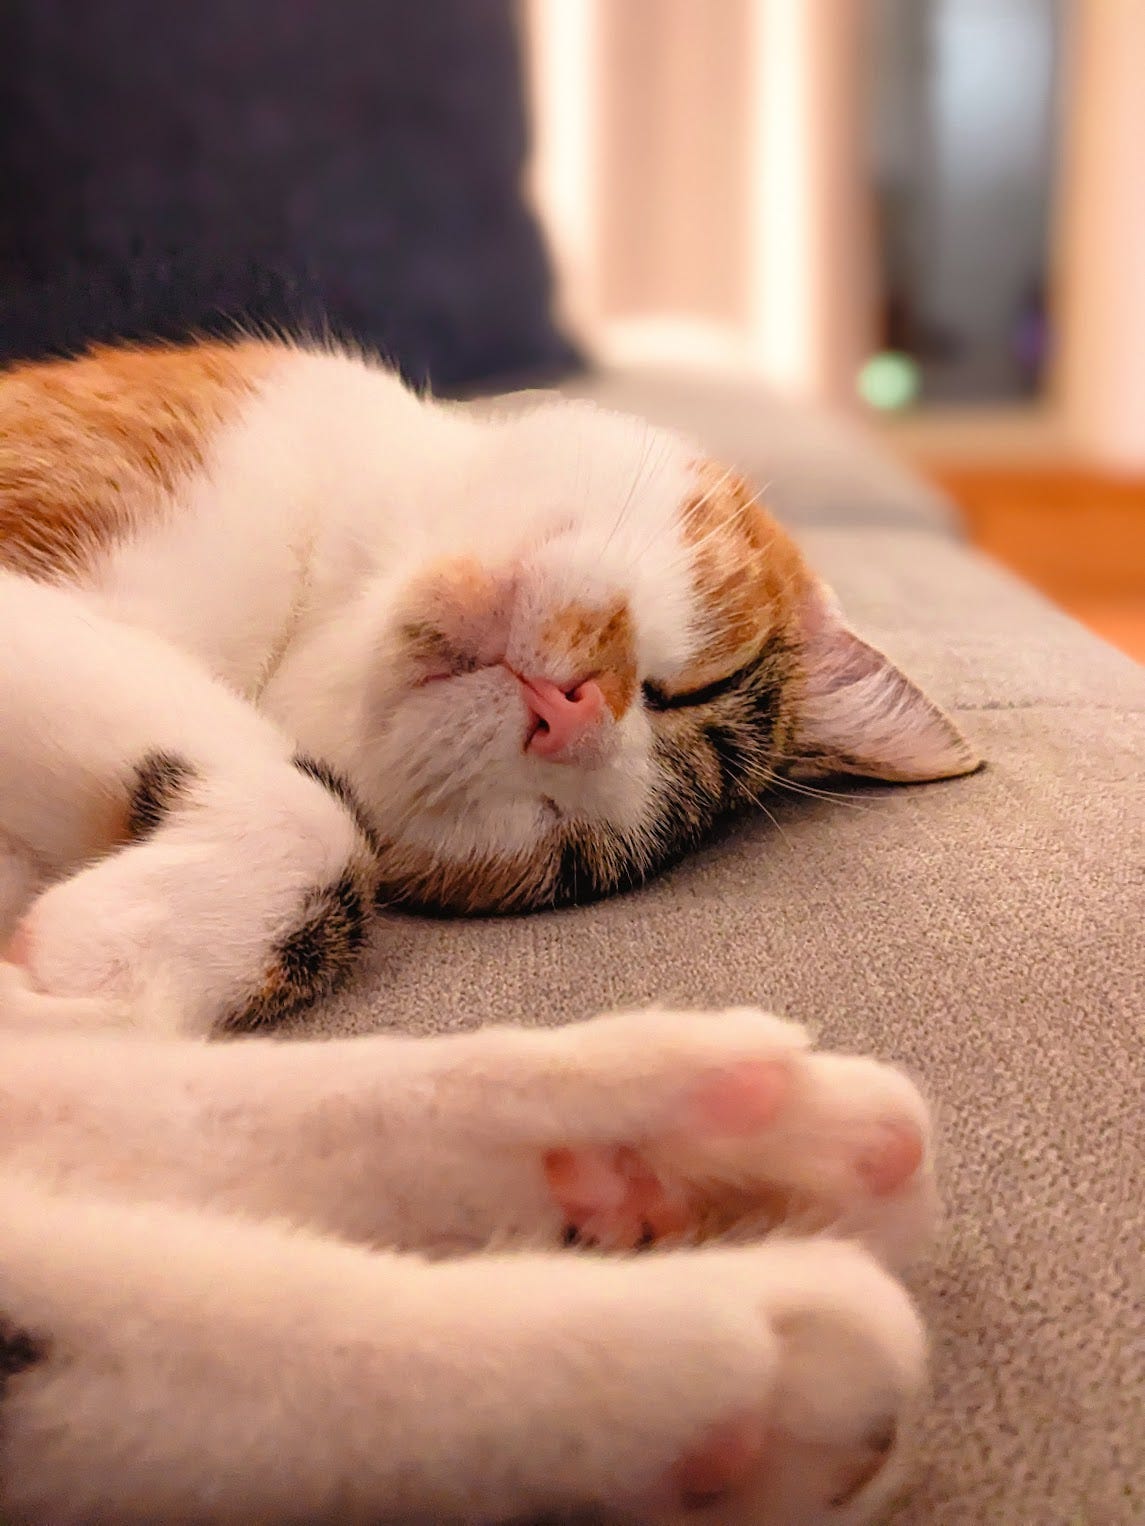 A calico cat lying on a couch, asleep, with her face almost upside down in a very cute sleeping post. Her pink paws are in the foreground and blurry.